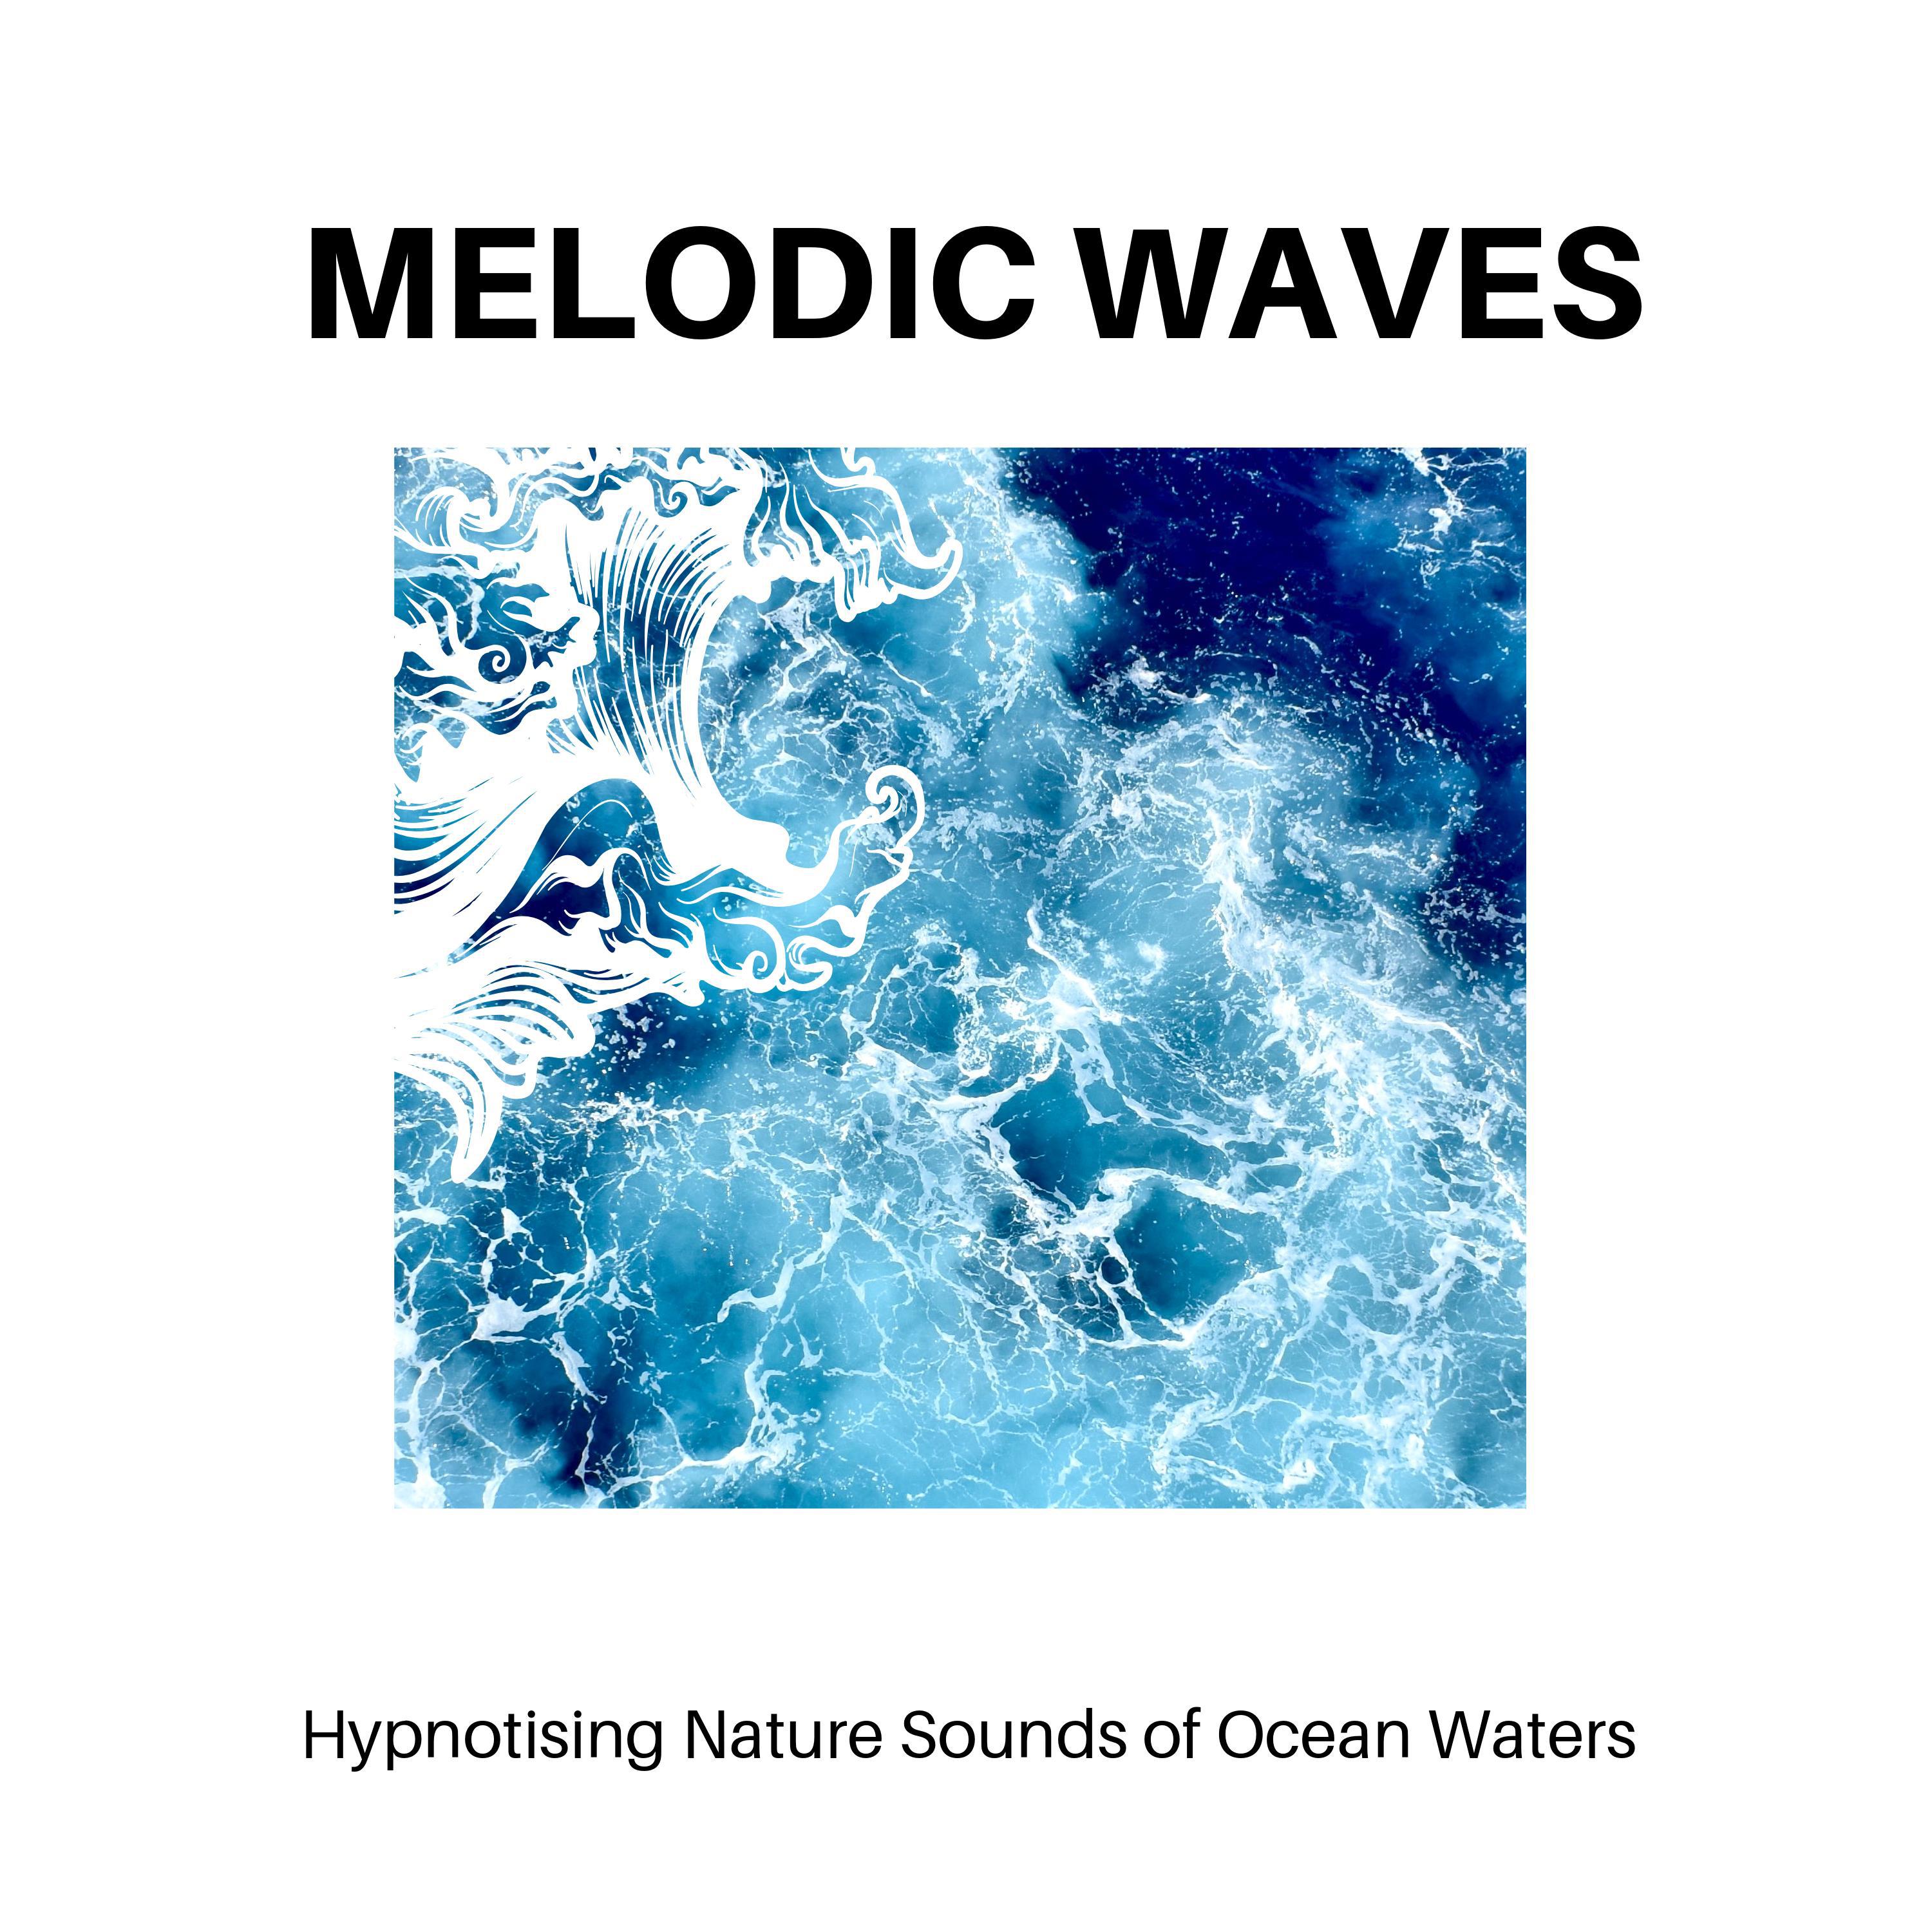 Raindrops Nature Music Project - Foamy White Ocean Waves